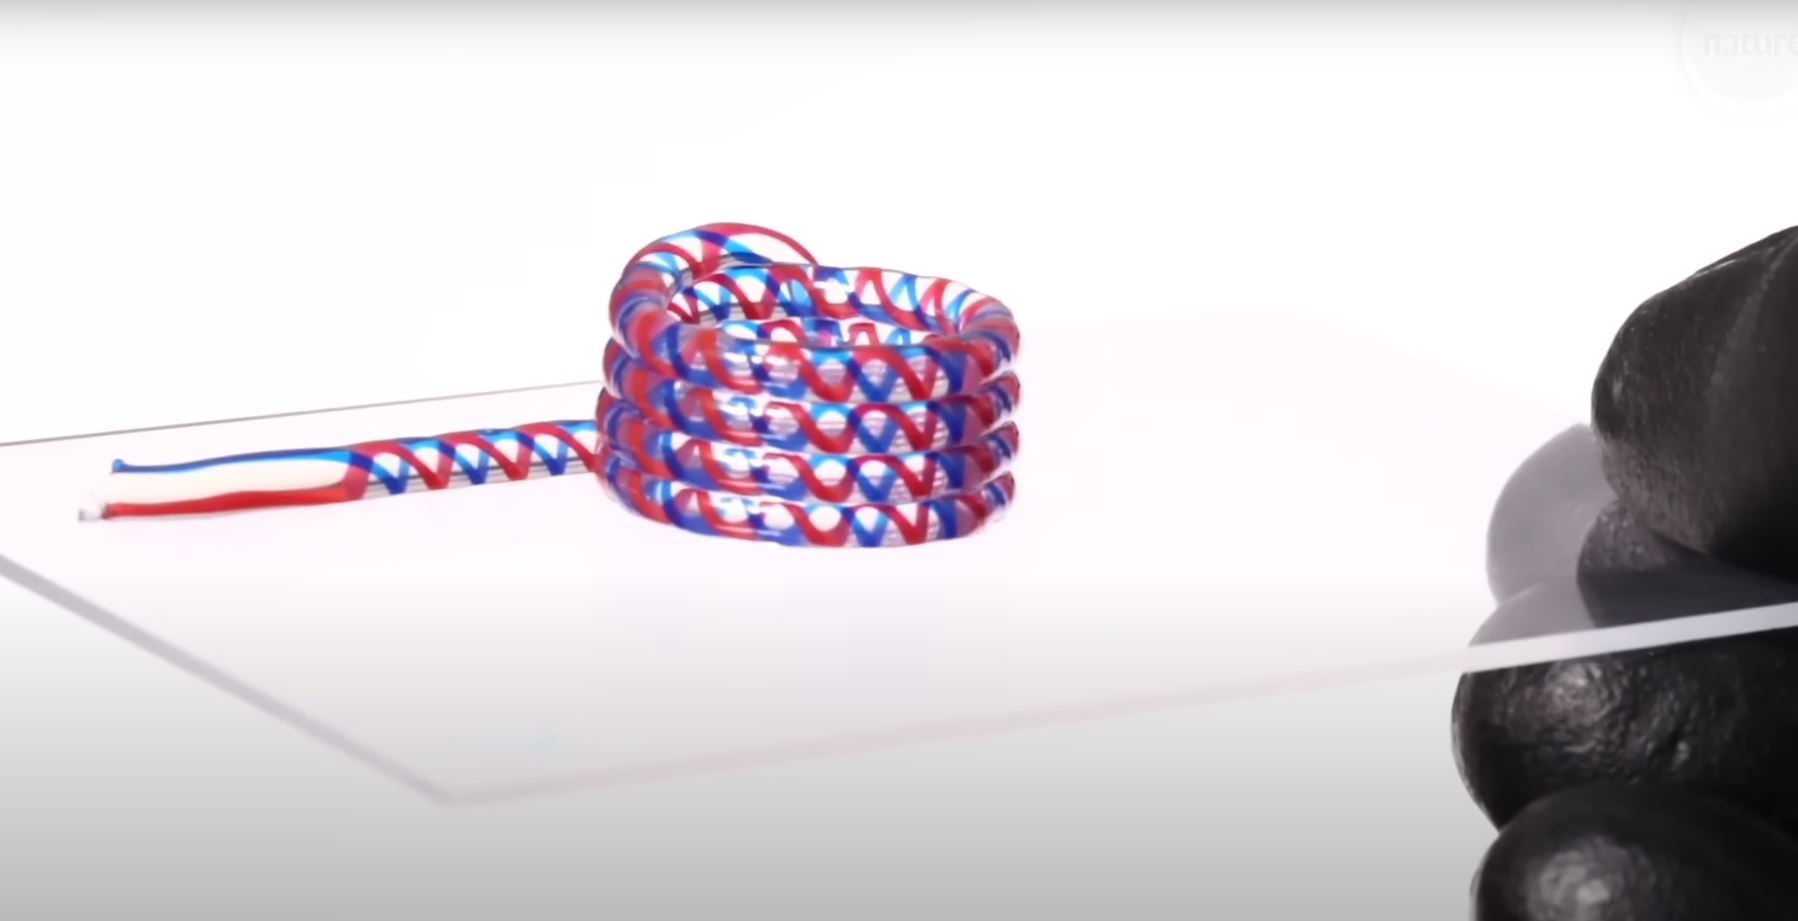 Twisty Gooey 3D Printing Could Change How We Think About Layers